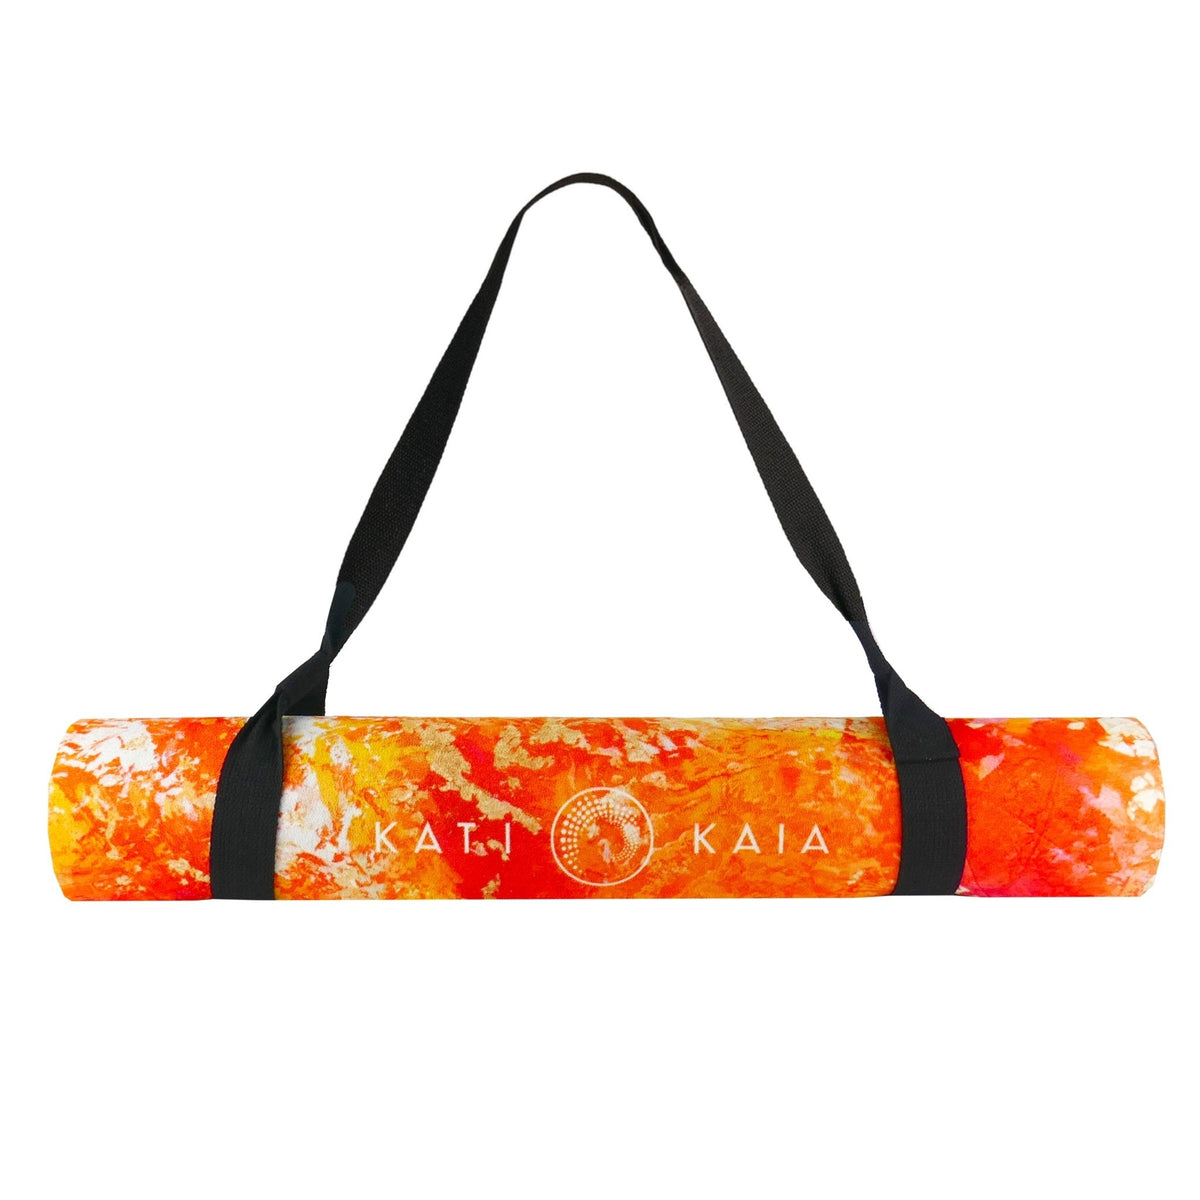 kati kaia luxury yoga mat in orange rolled with carry strap 